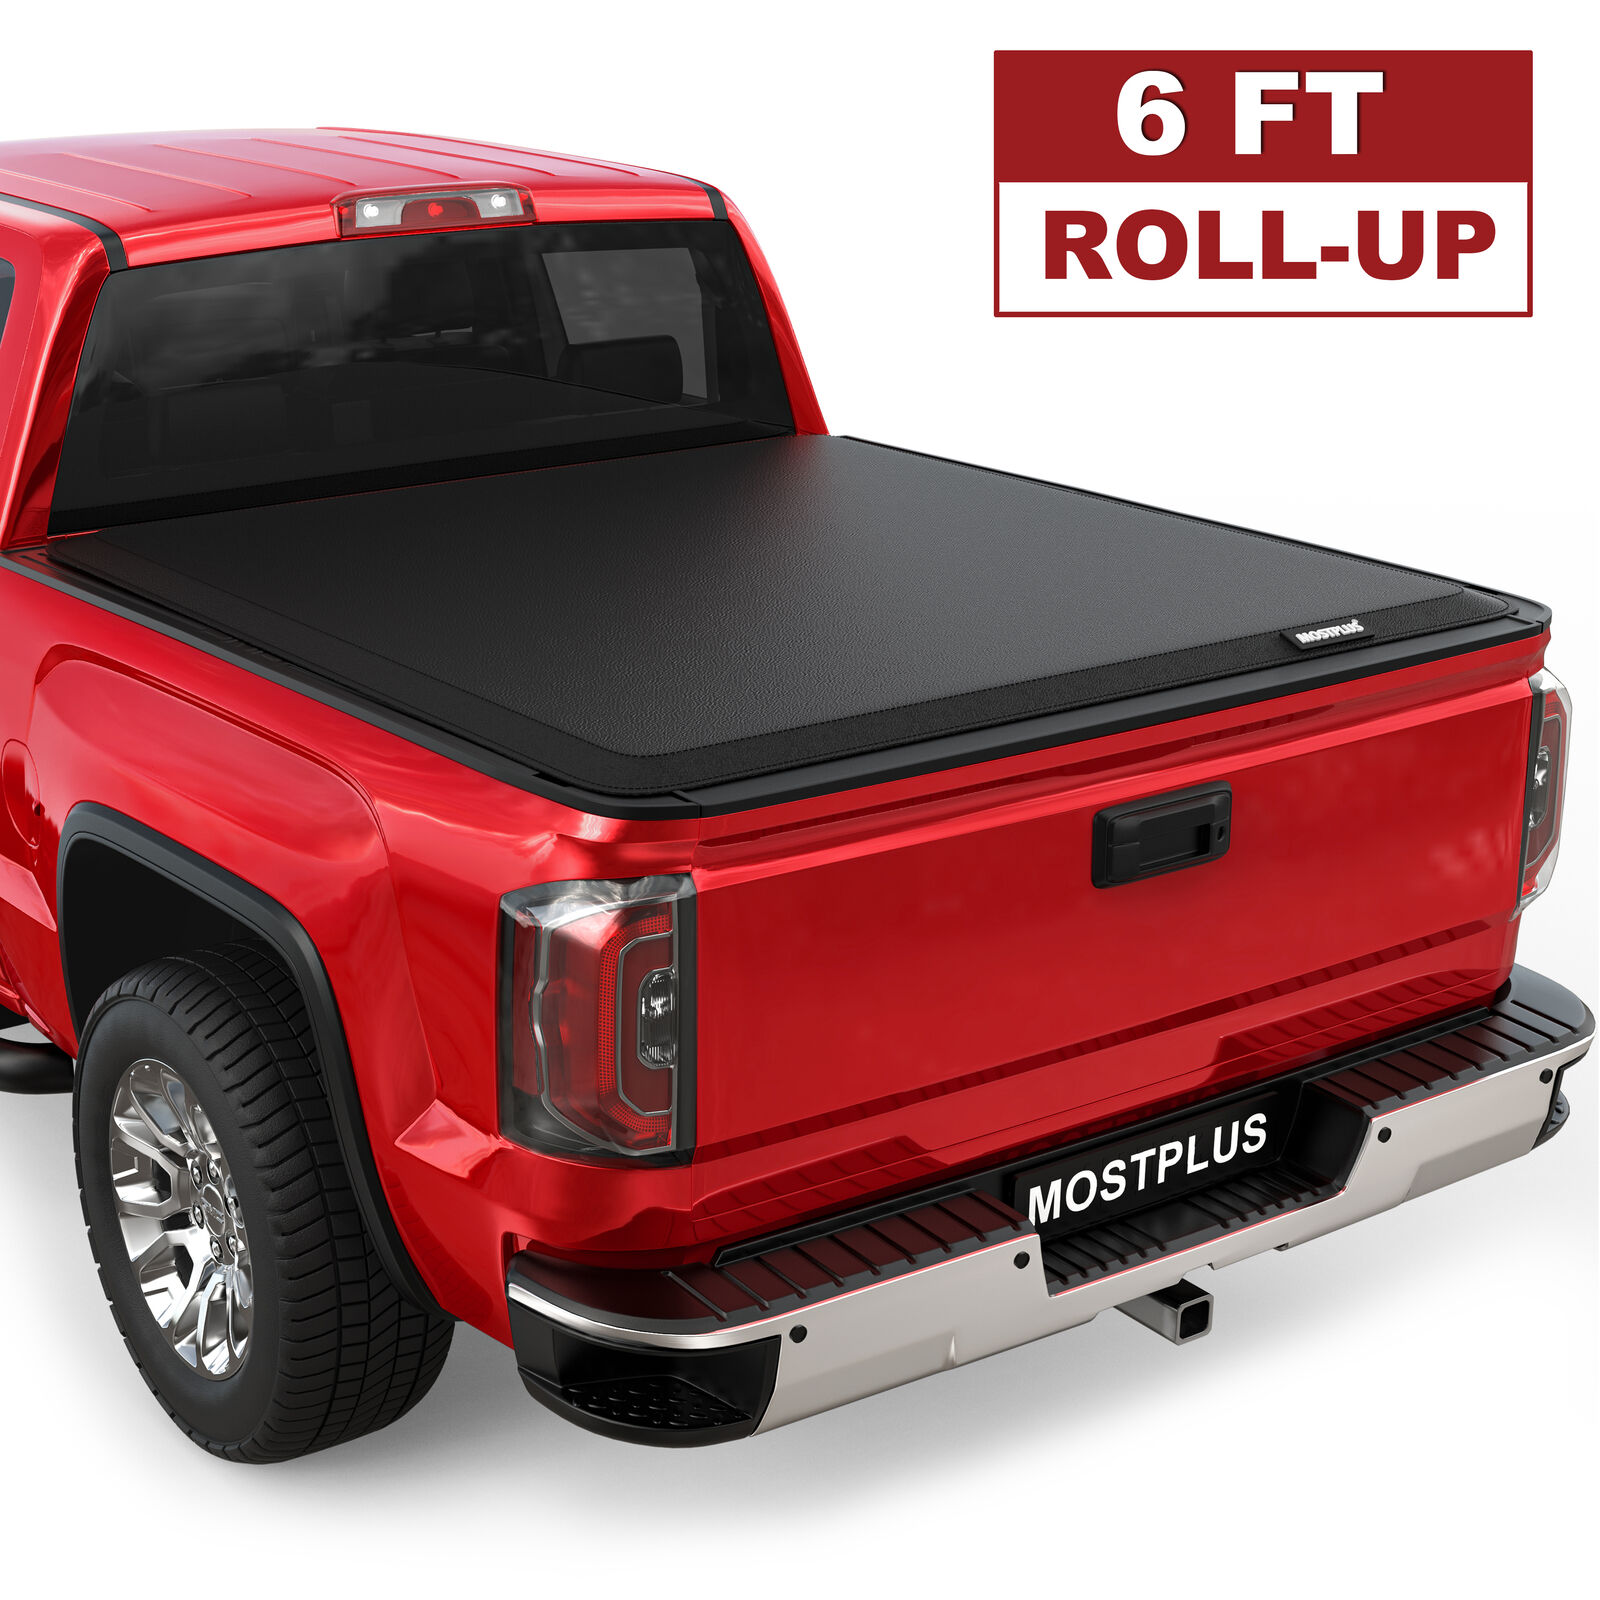 6FT Roll Up Truck Bed Tonneau Cover For 1982-93 Chevy S10 GMC S15 1991-93 Sonoma